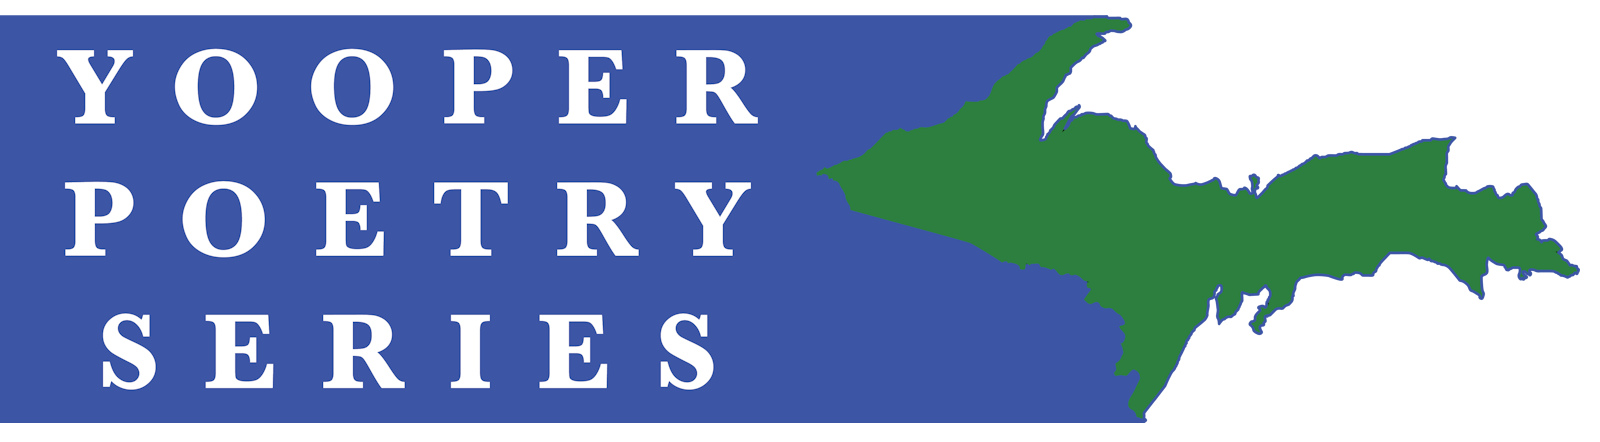 A logo featuring the text "yoopers poetry series" in white over a blue background, with a green silhouette of the upper peninsula of michigan to the right of the text.